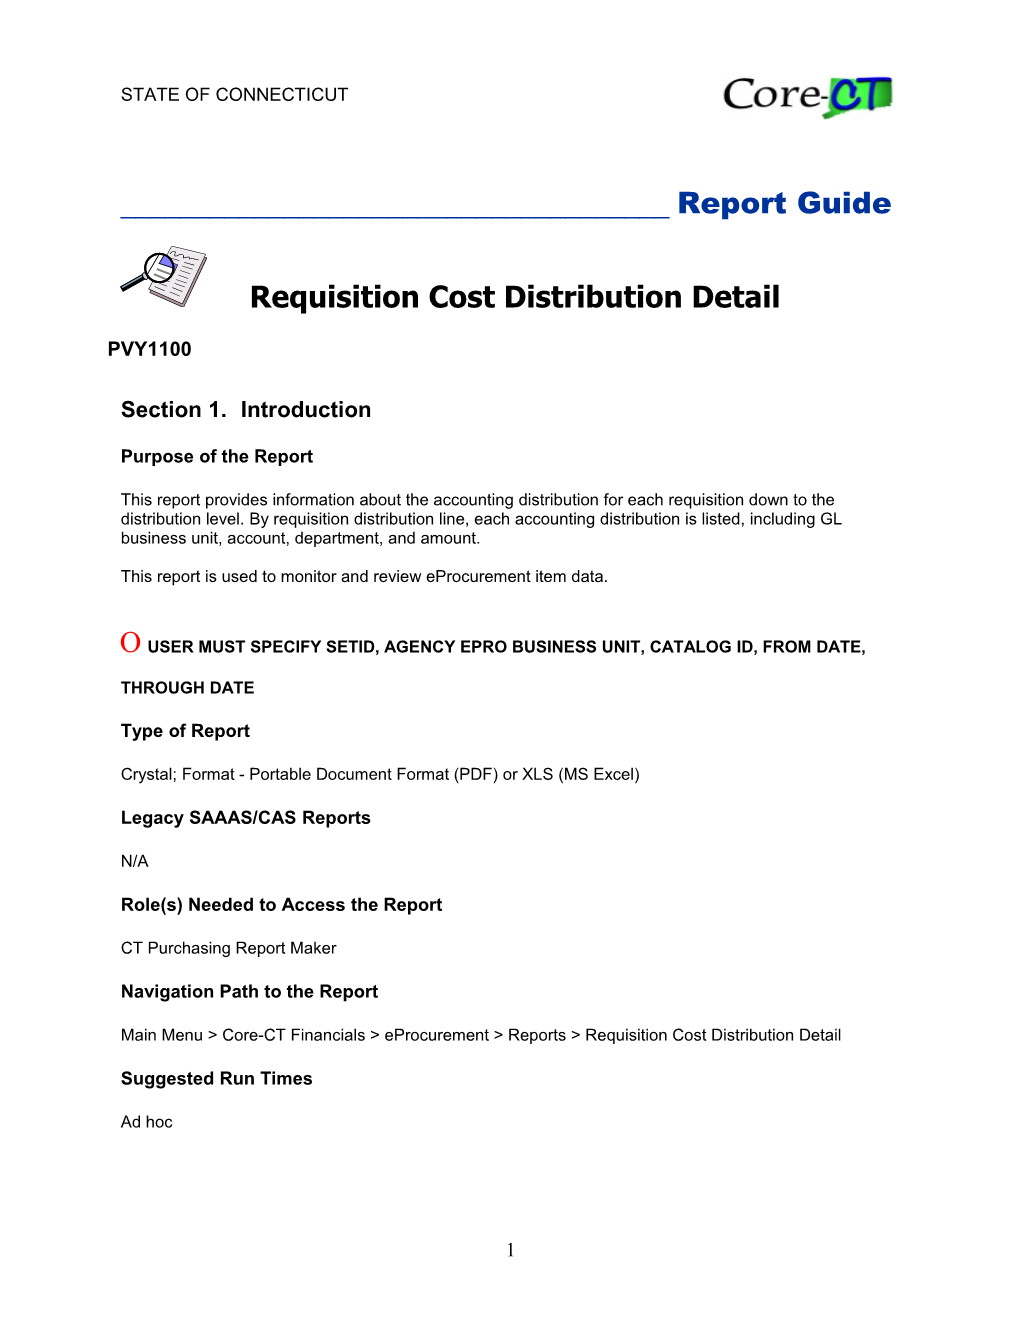 Requisition Cost Distribution Detail